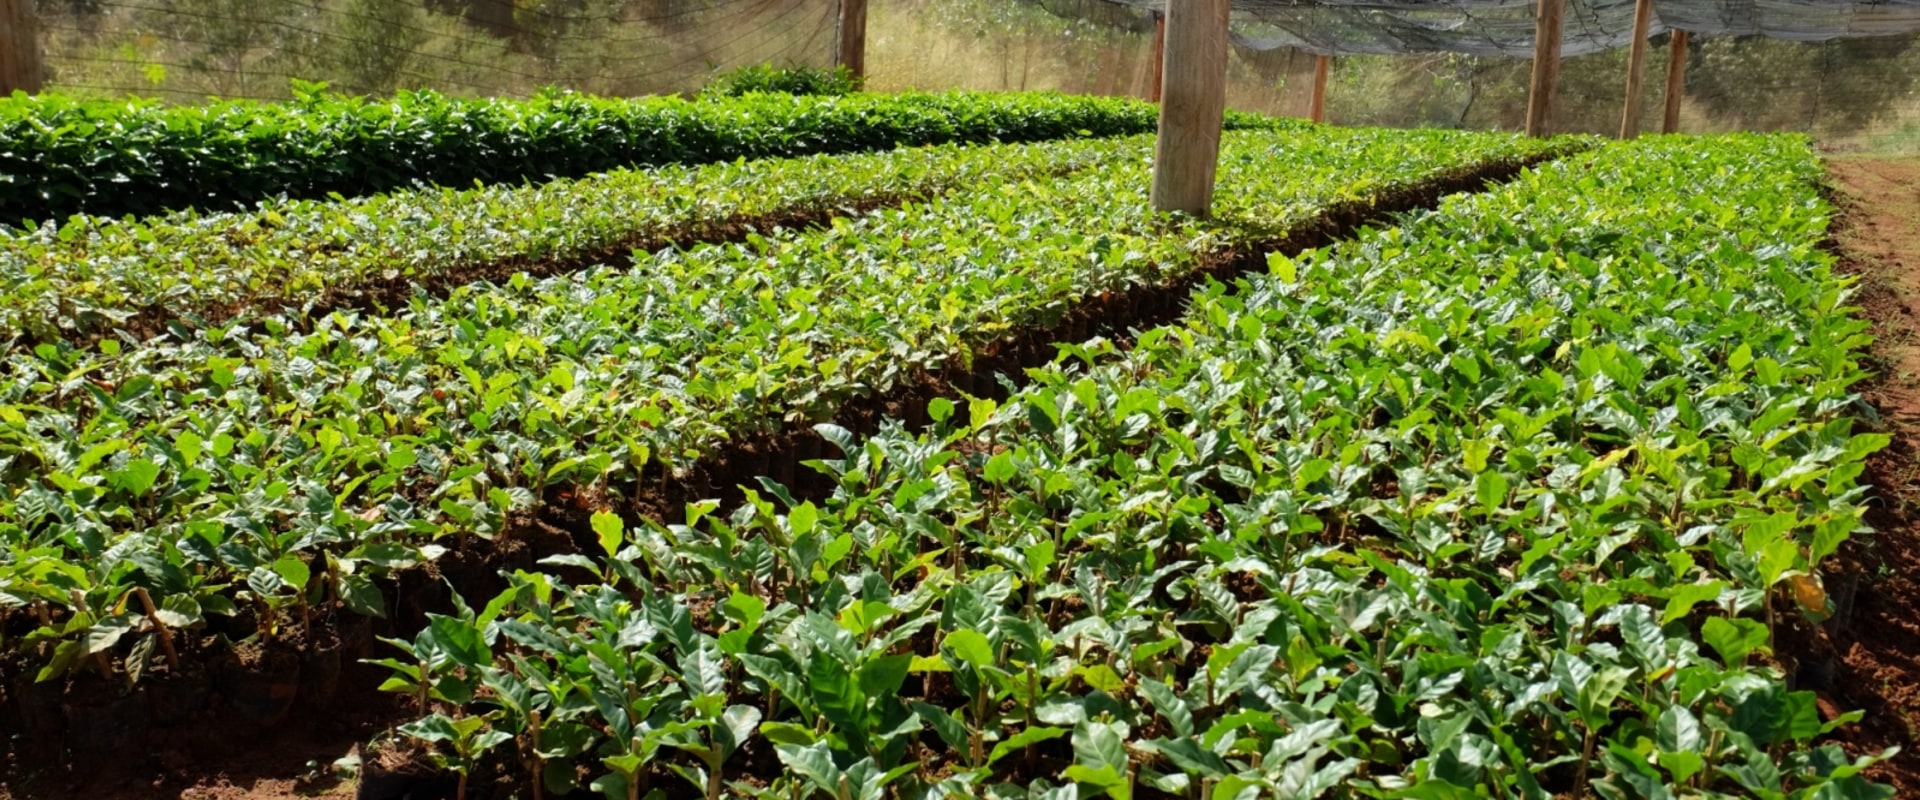 What Climate is Best for Growing Coffee?